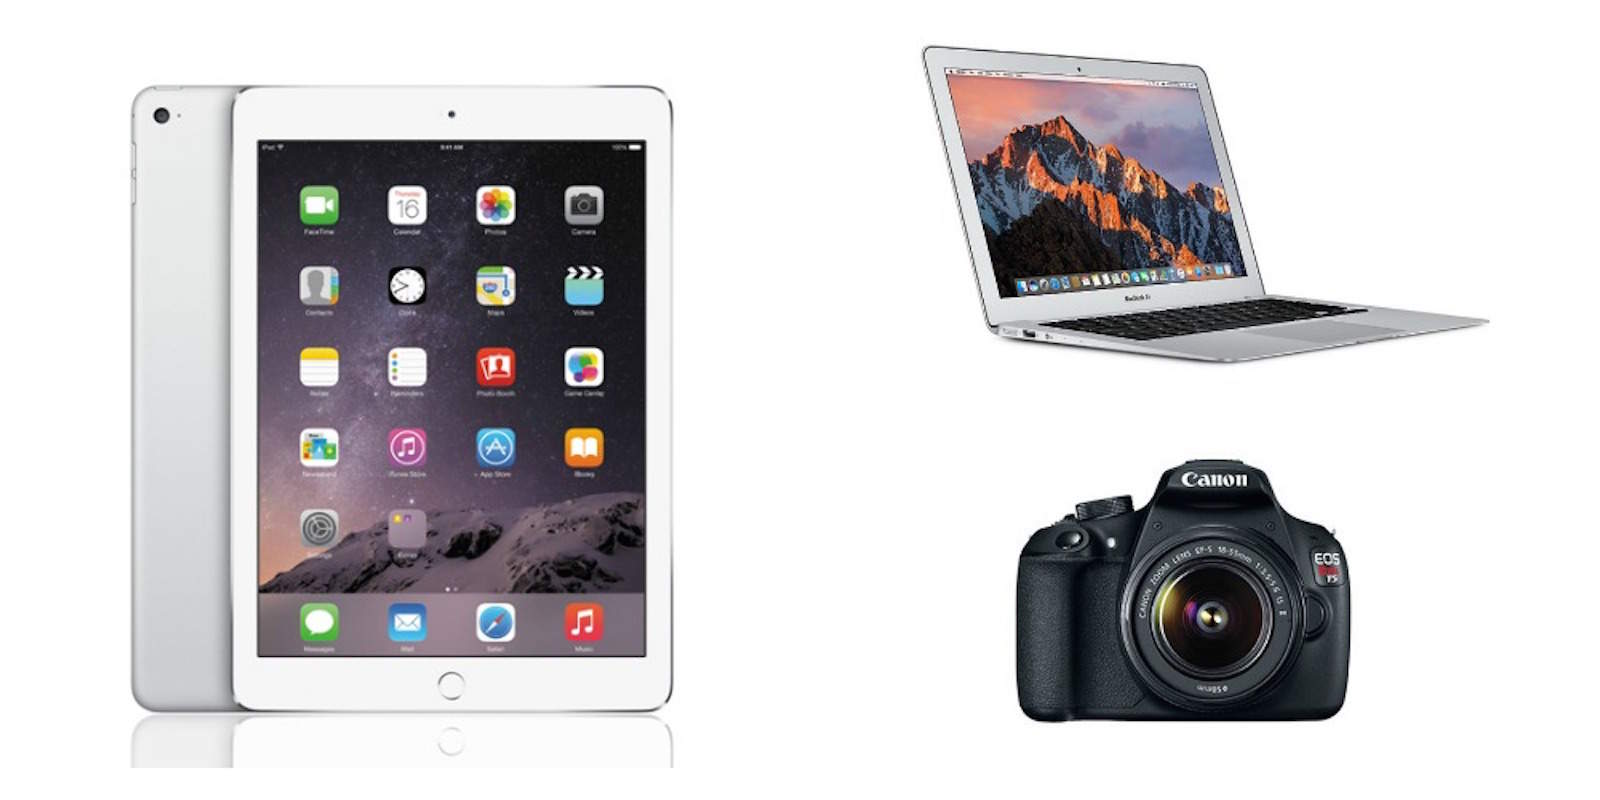 Take advantage of great deals on MacBook Air, iPad 2, and much more.